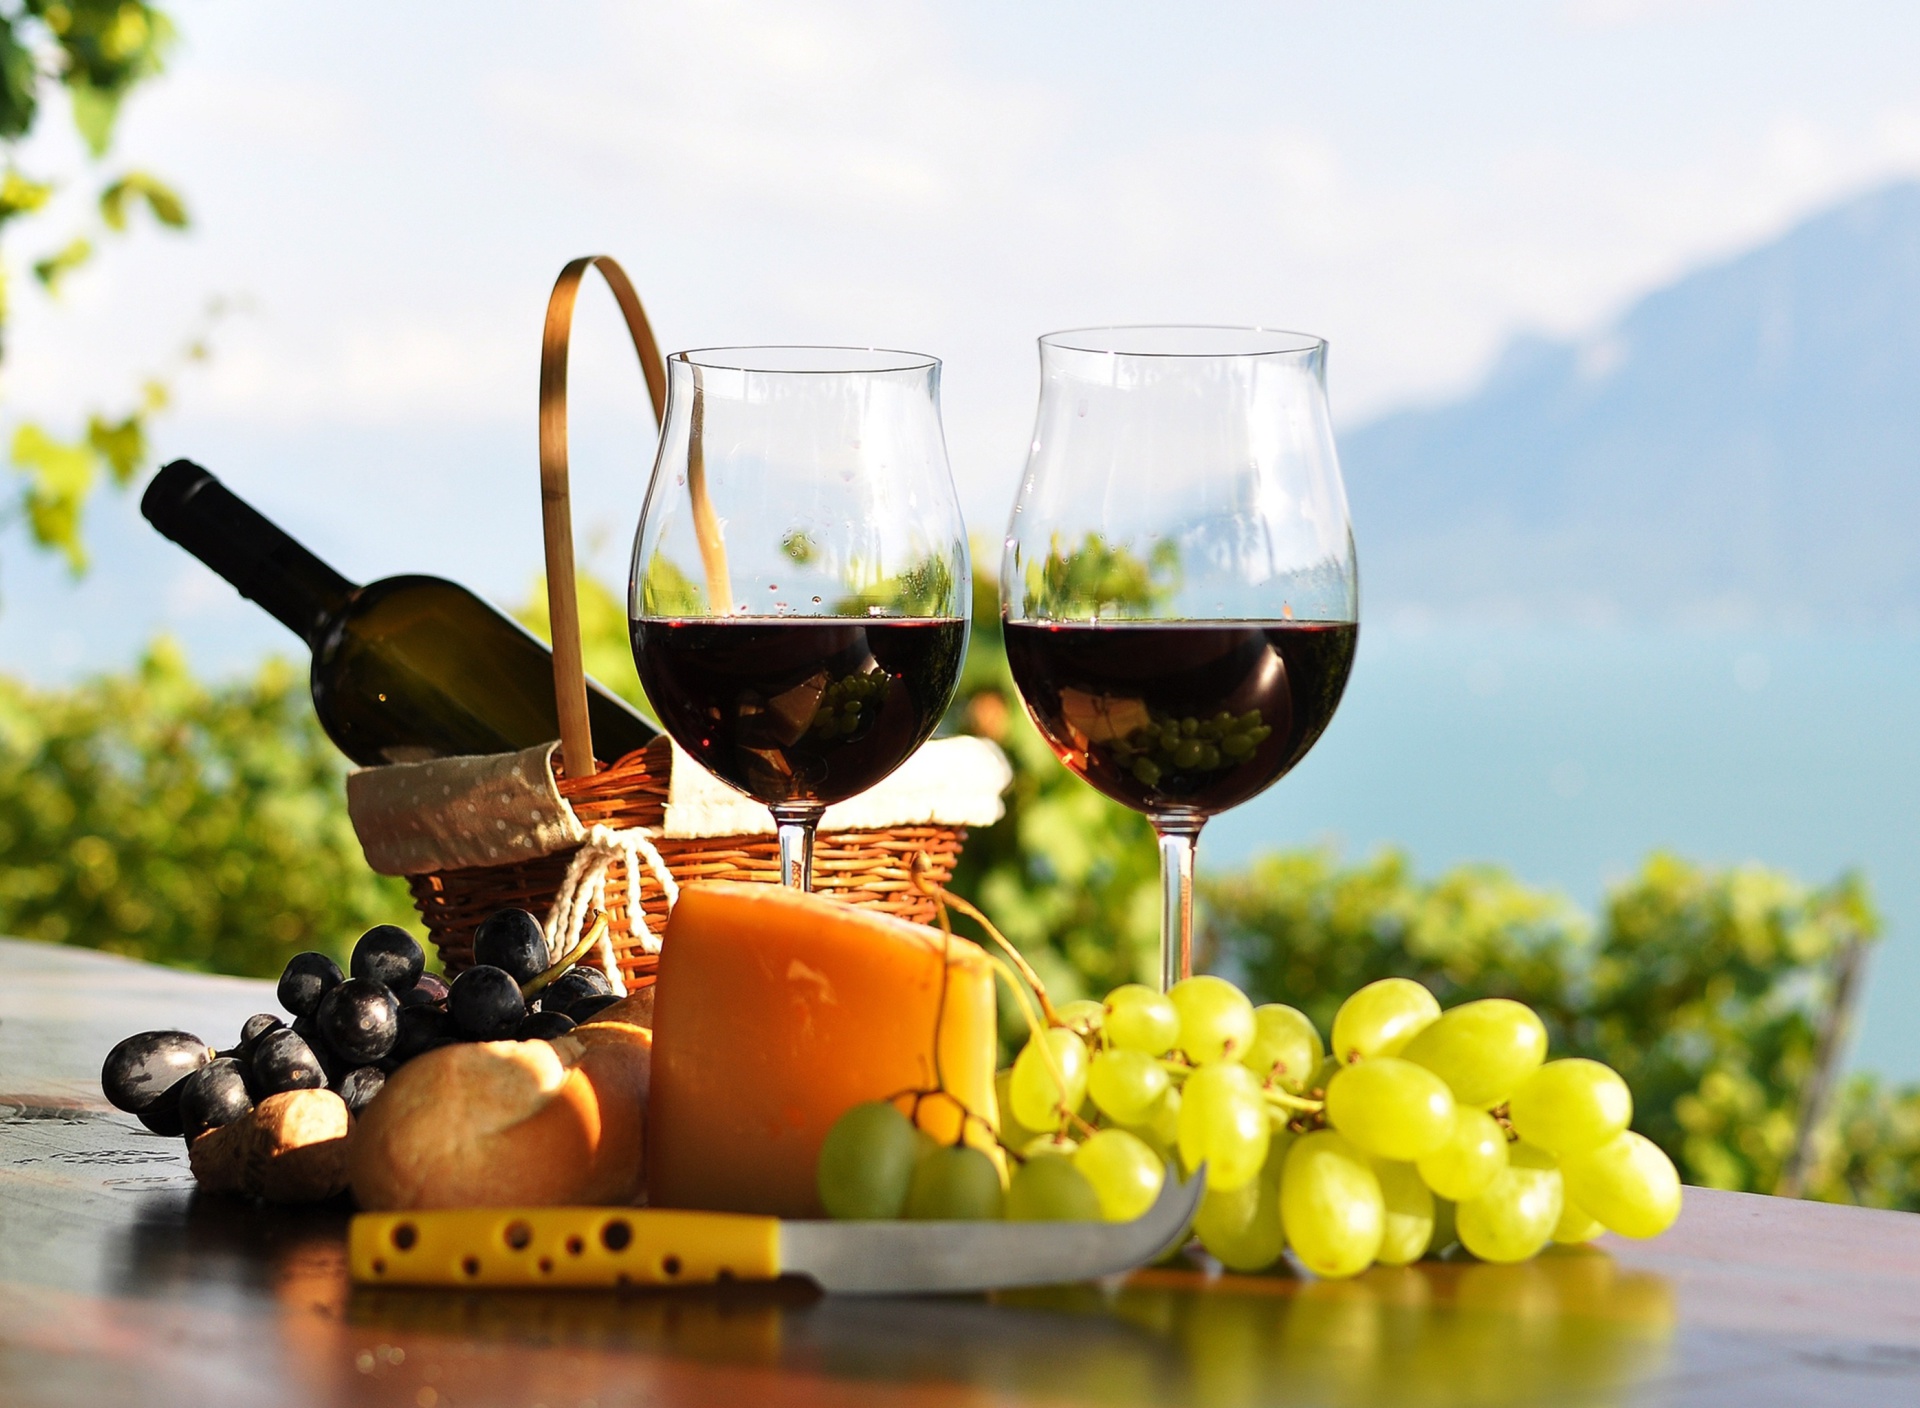 Picnic with wine and grapes screenshot #1 1920x1408